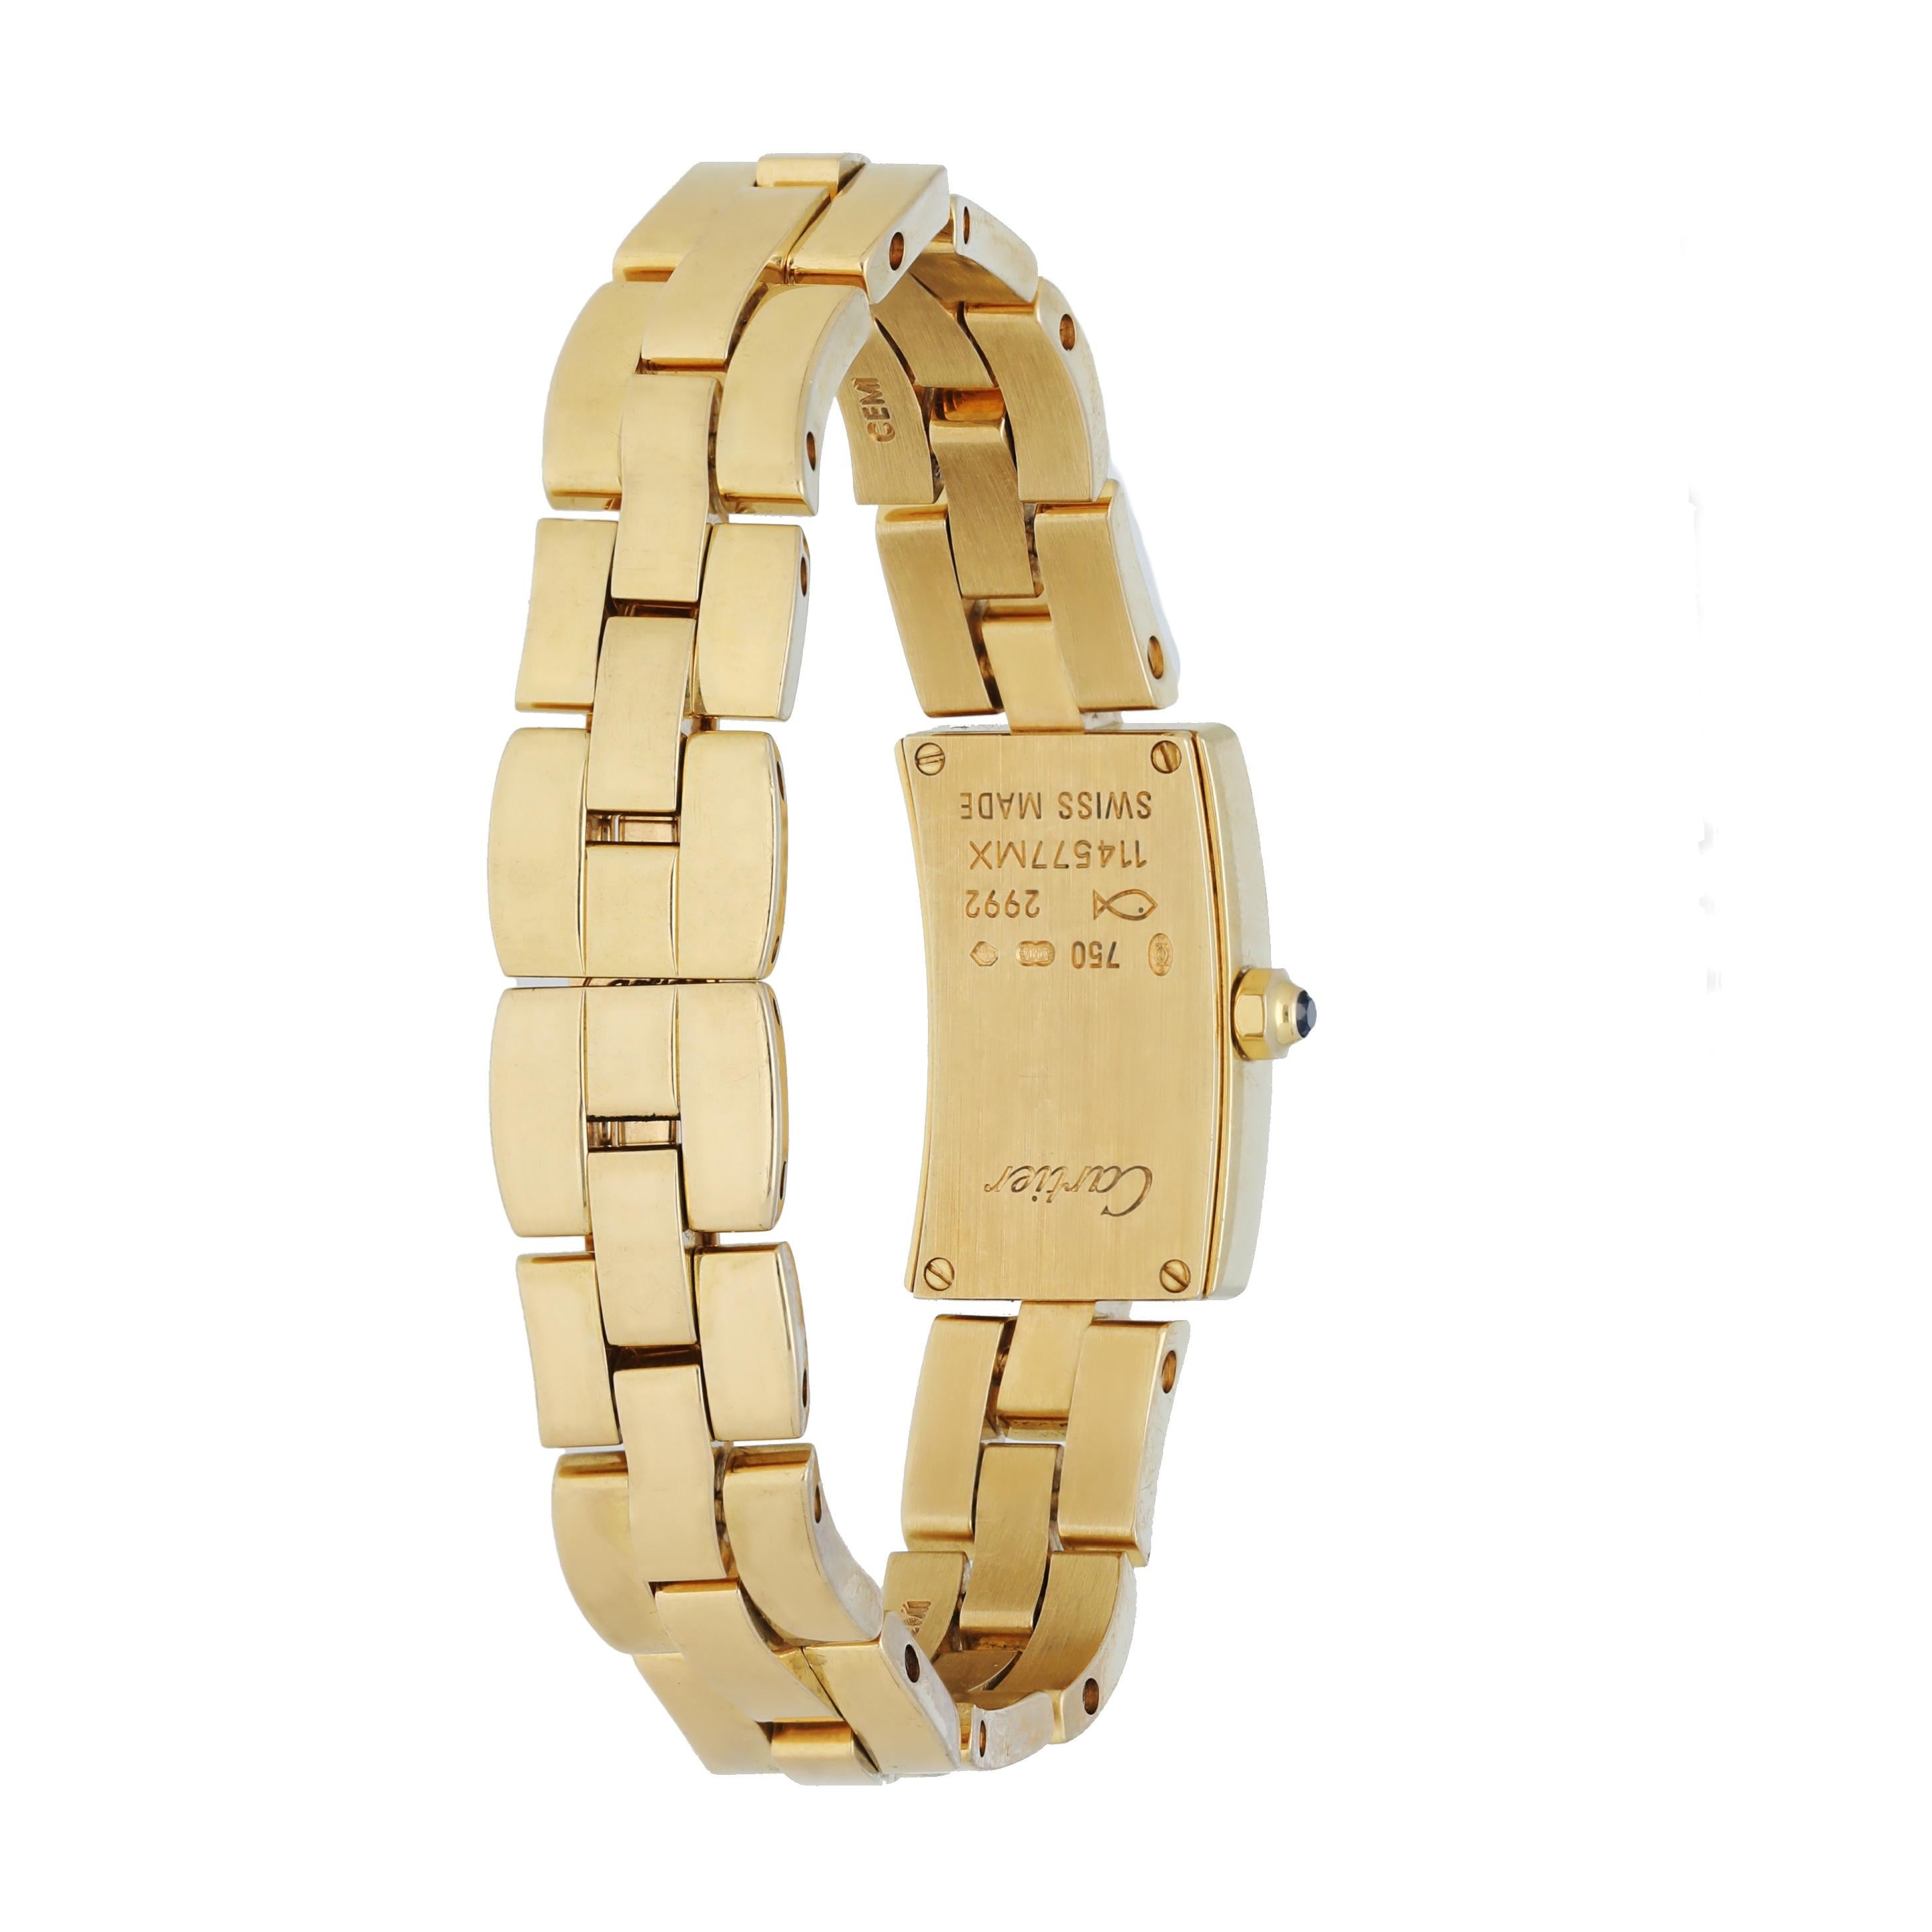 Cartier Ballerine 2992 Yellow Gold Ladies Watch In Excellent Condition For Sale In New York, NY